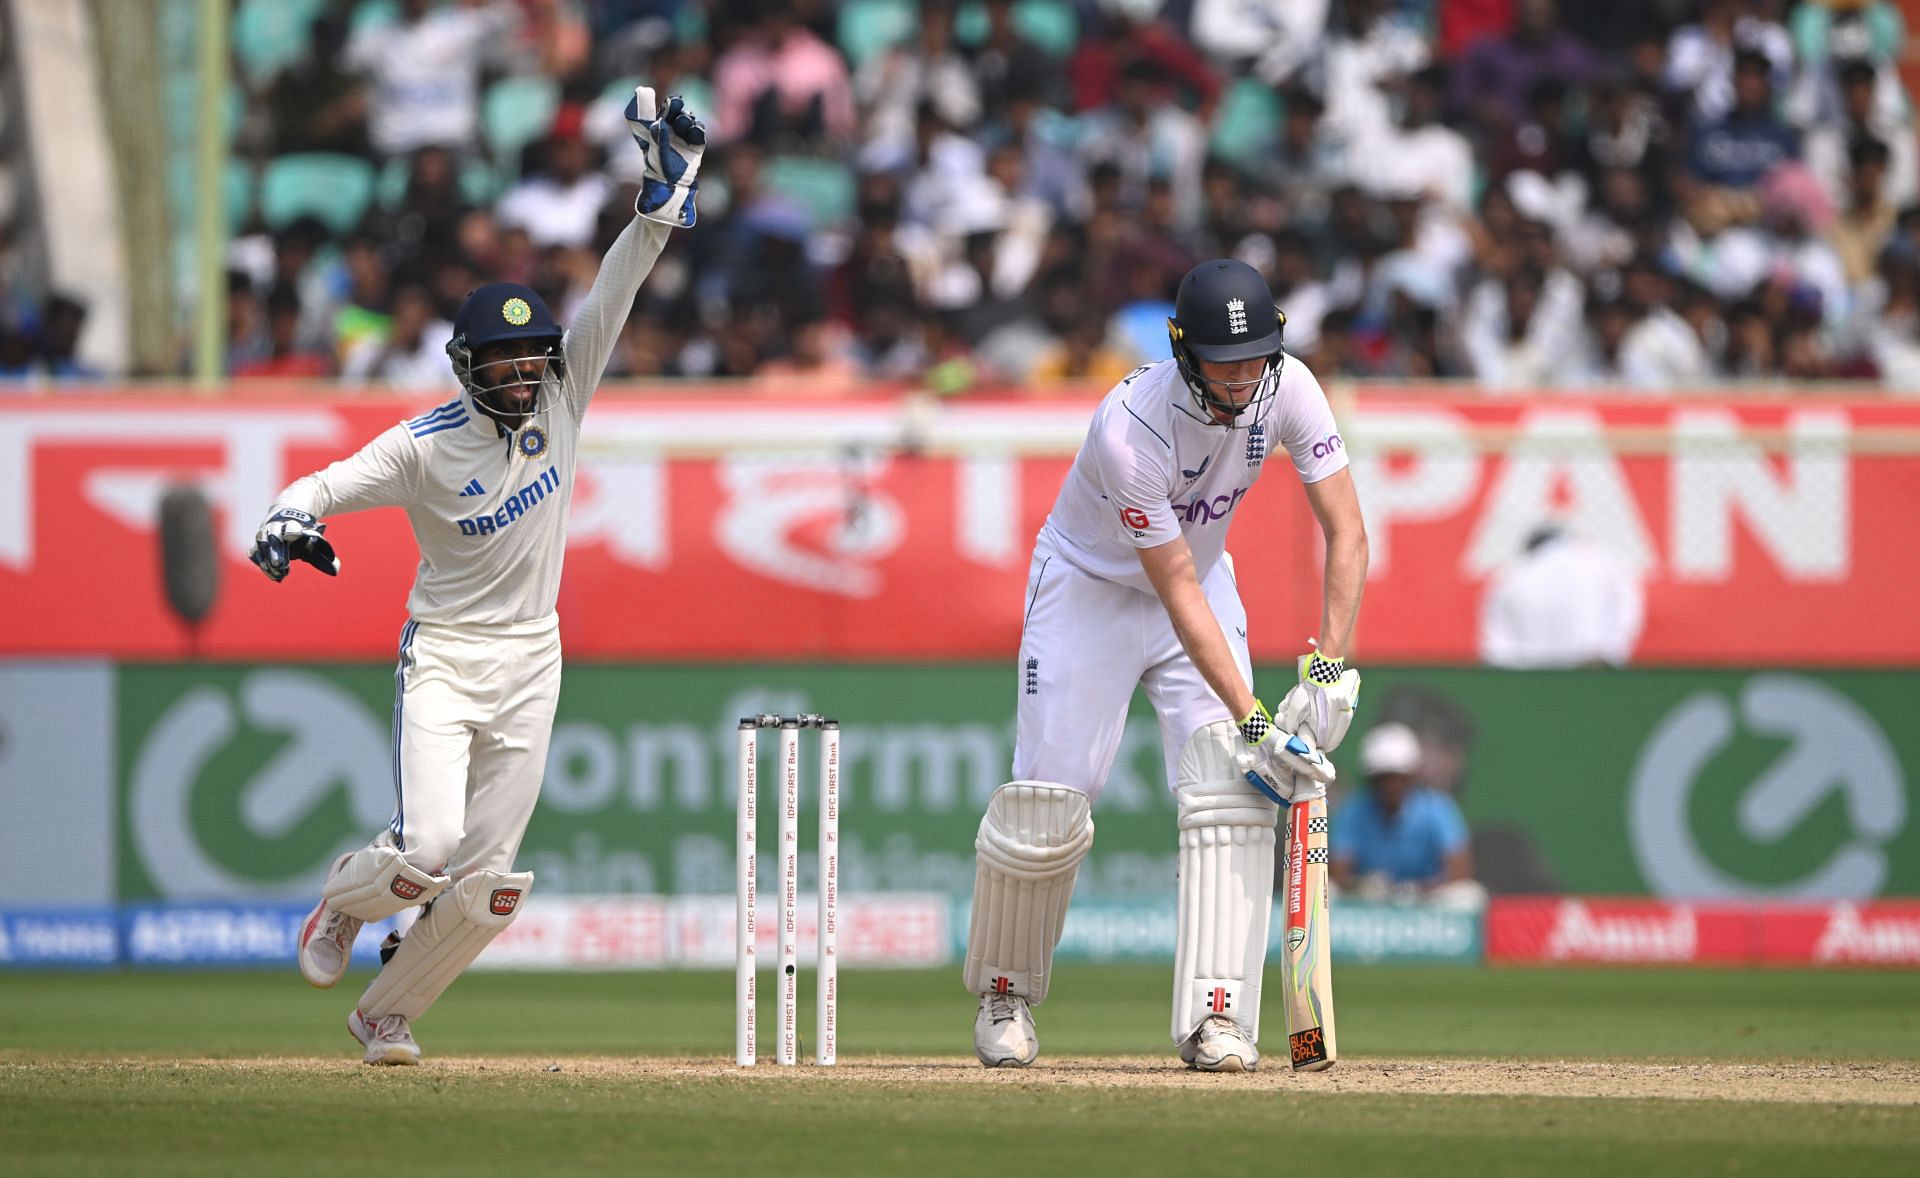 Crawley was trapped in front of the stumps by Kuldeep Yadav. (Pic: Getty)